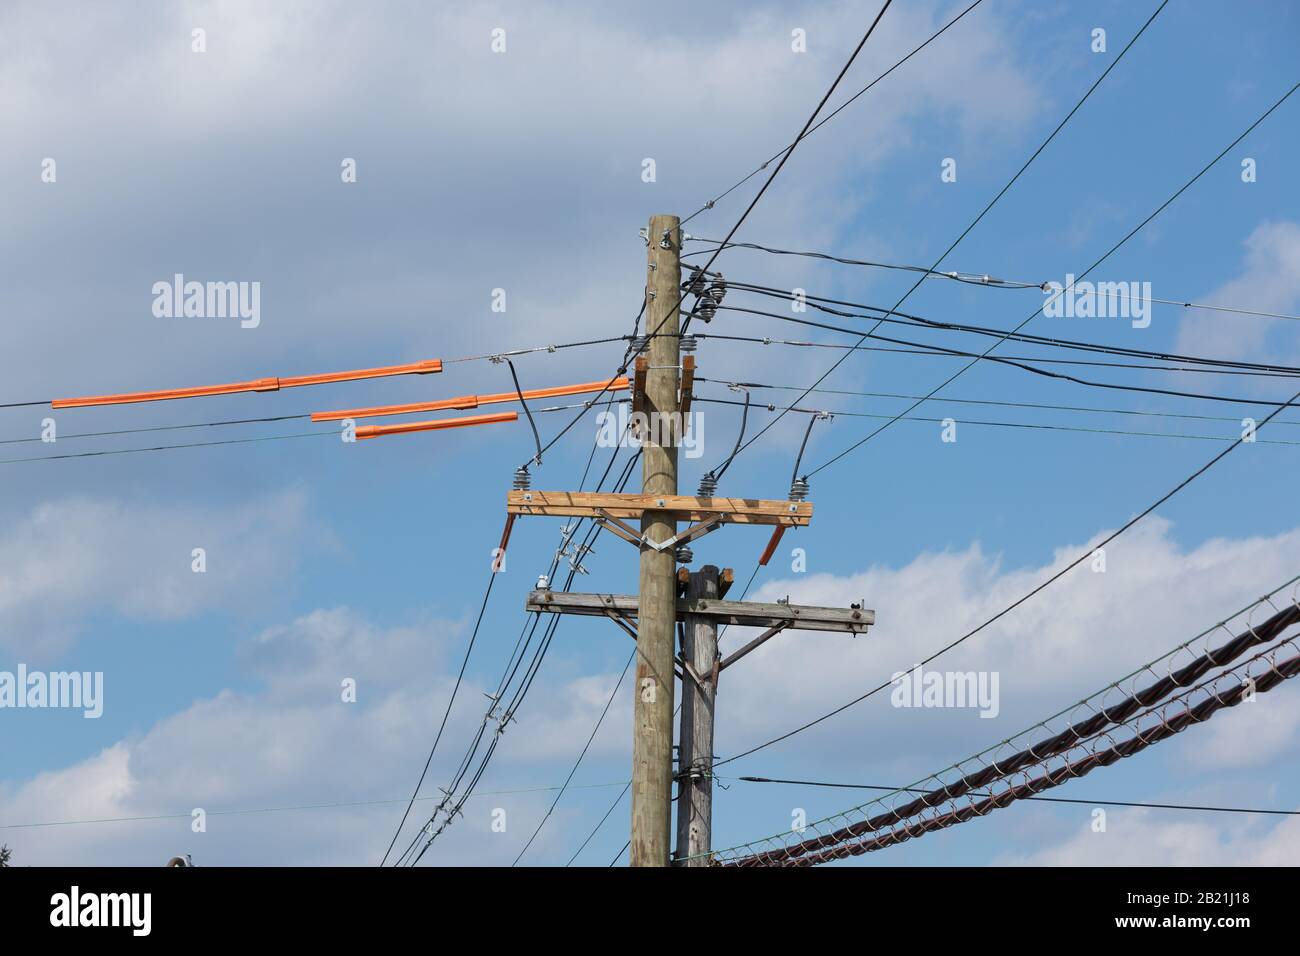 A sequence of images of a wooden electrical utility pole being replaced, taken over the course of several days. Stock Photo